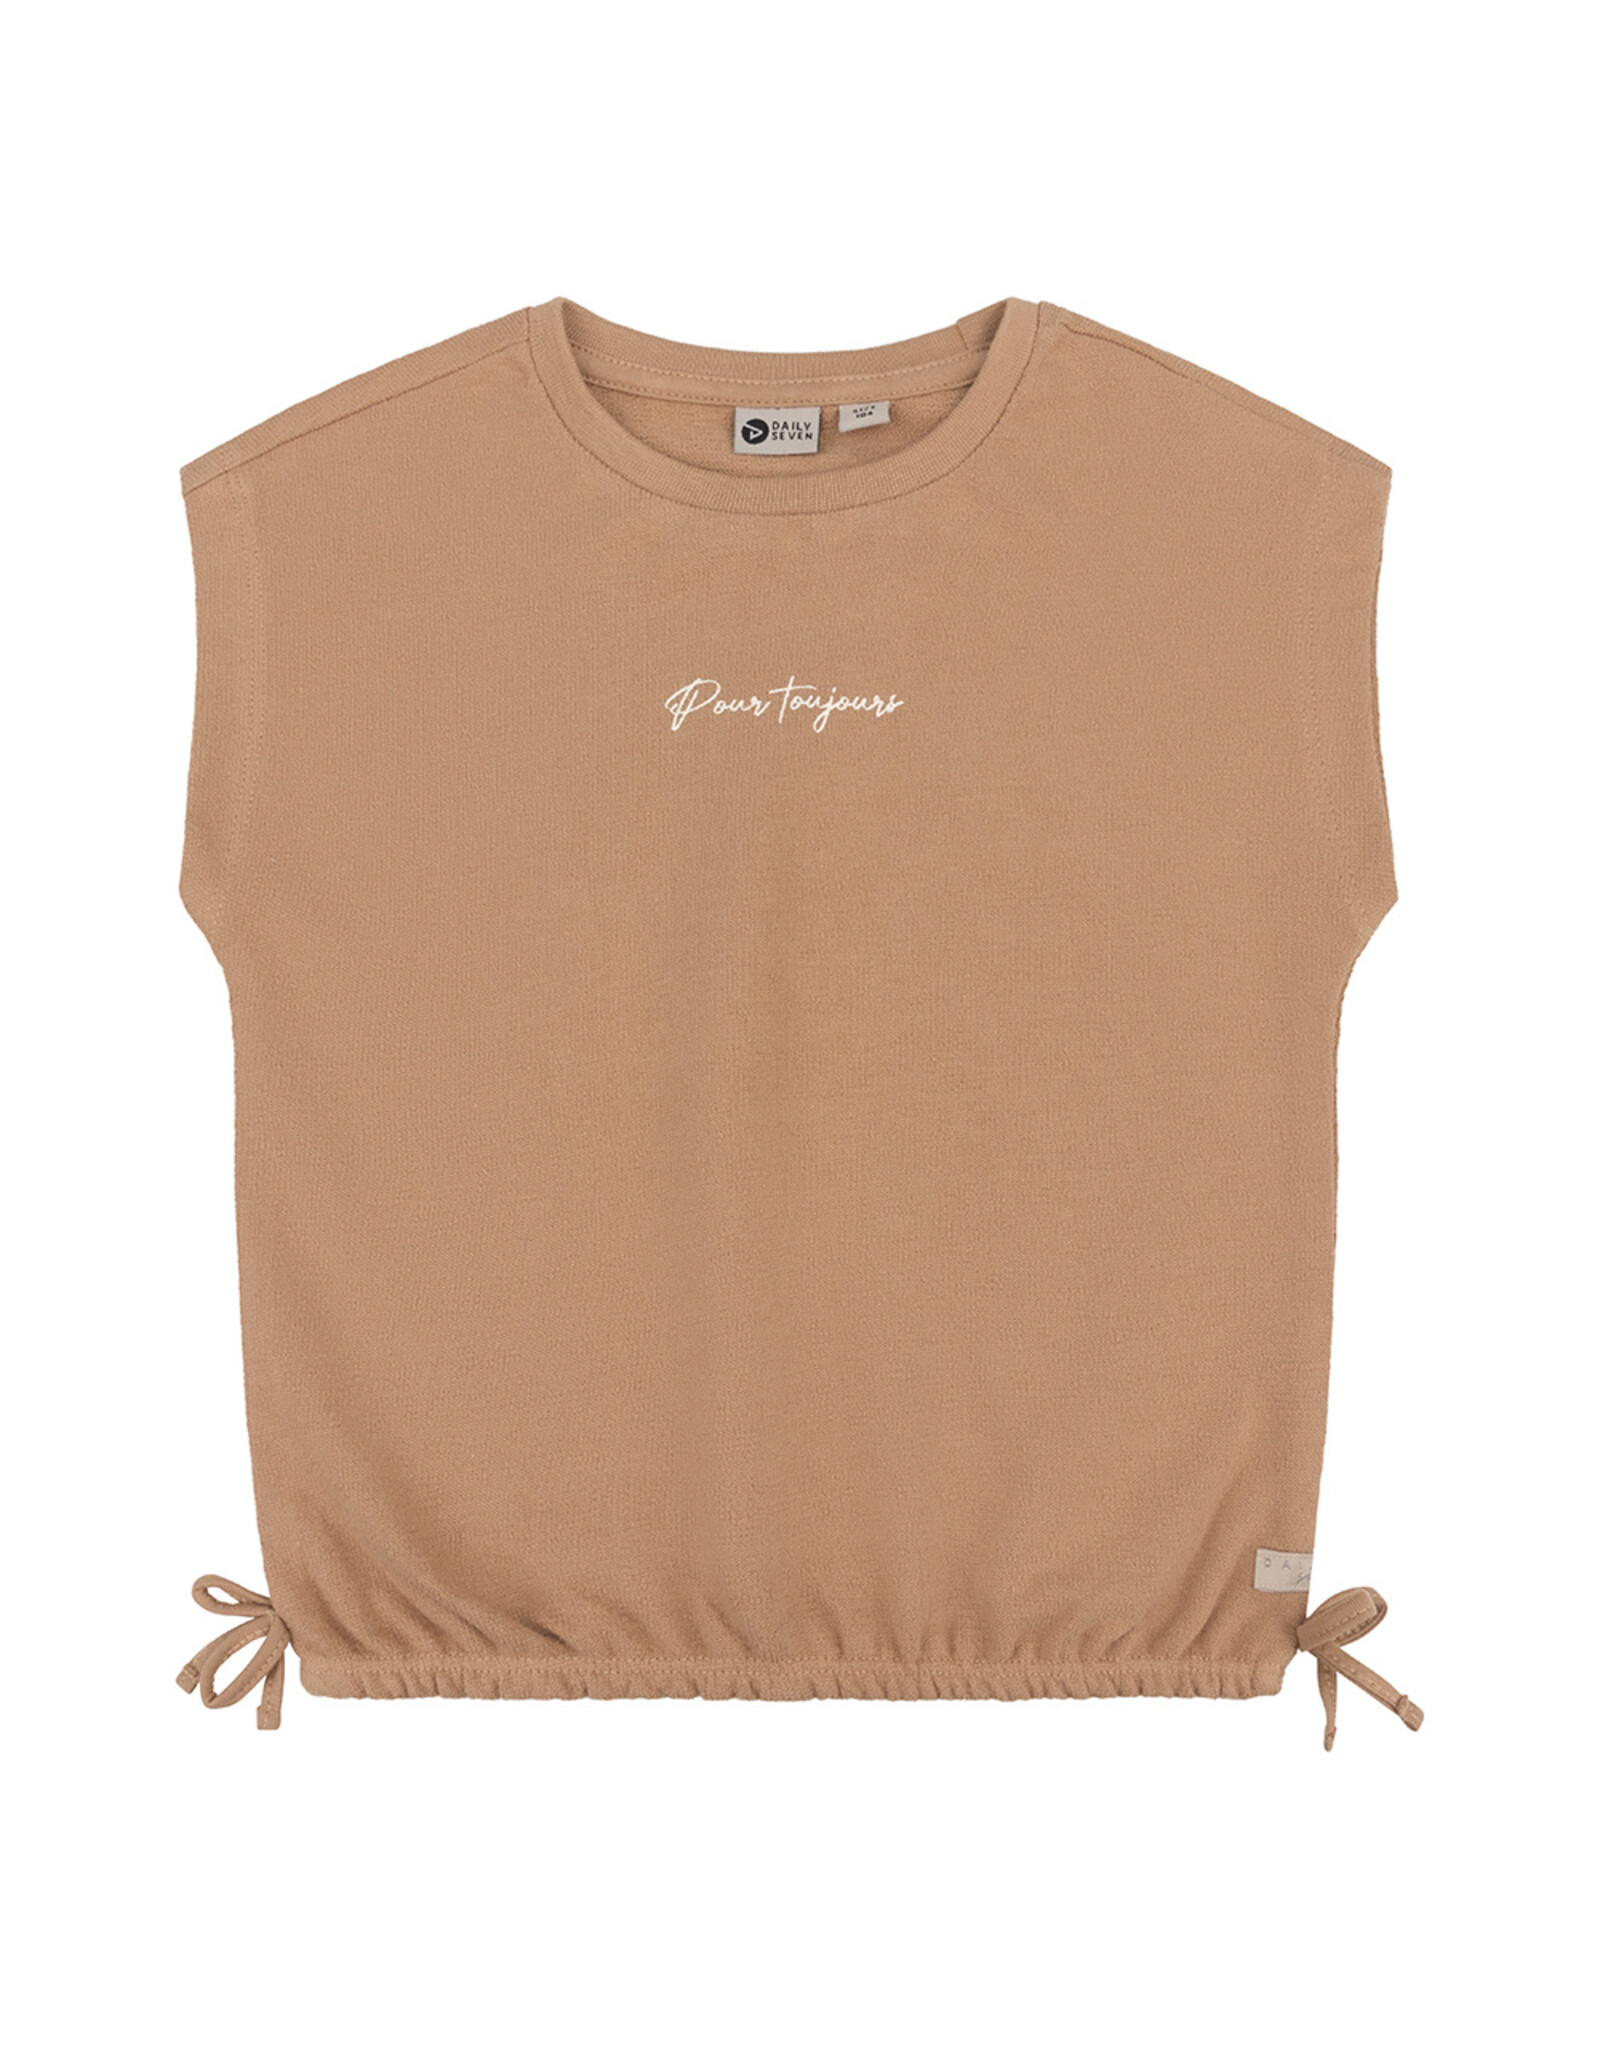 Daily7 Organic T-shirt Pour Toujours Camel sand-730